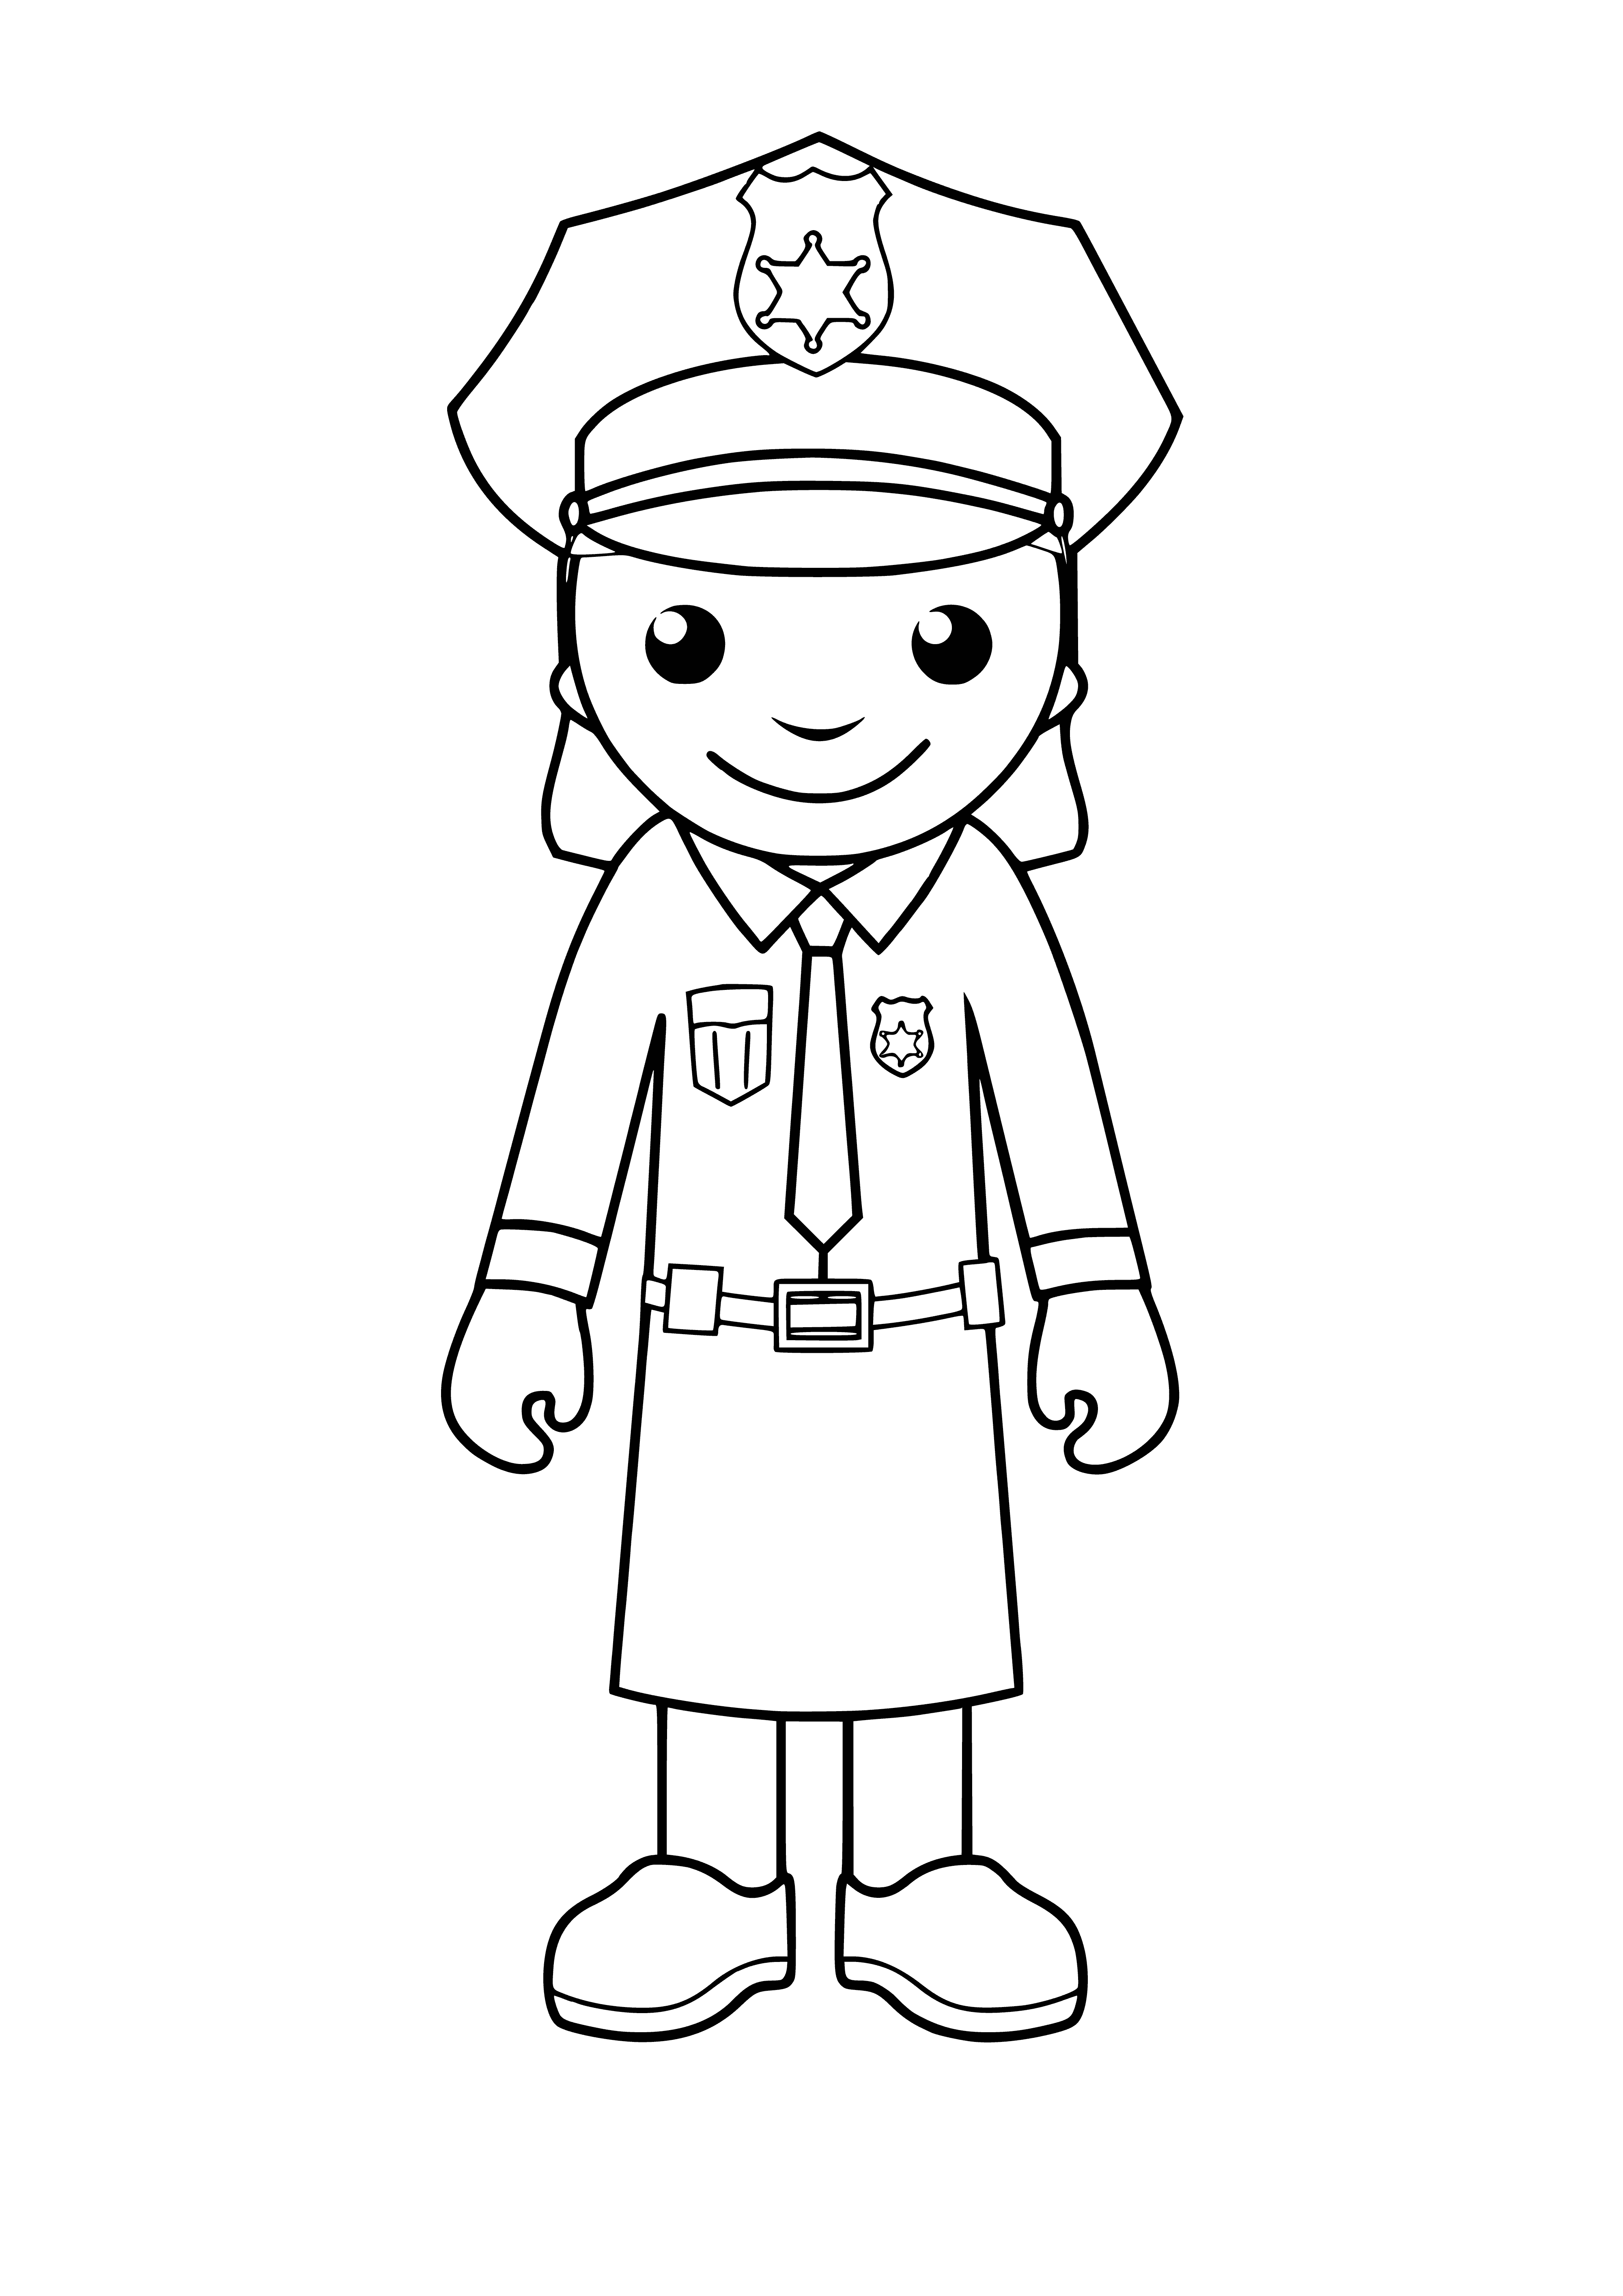 Police officer coloring page